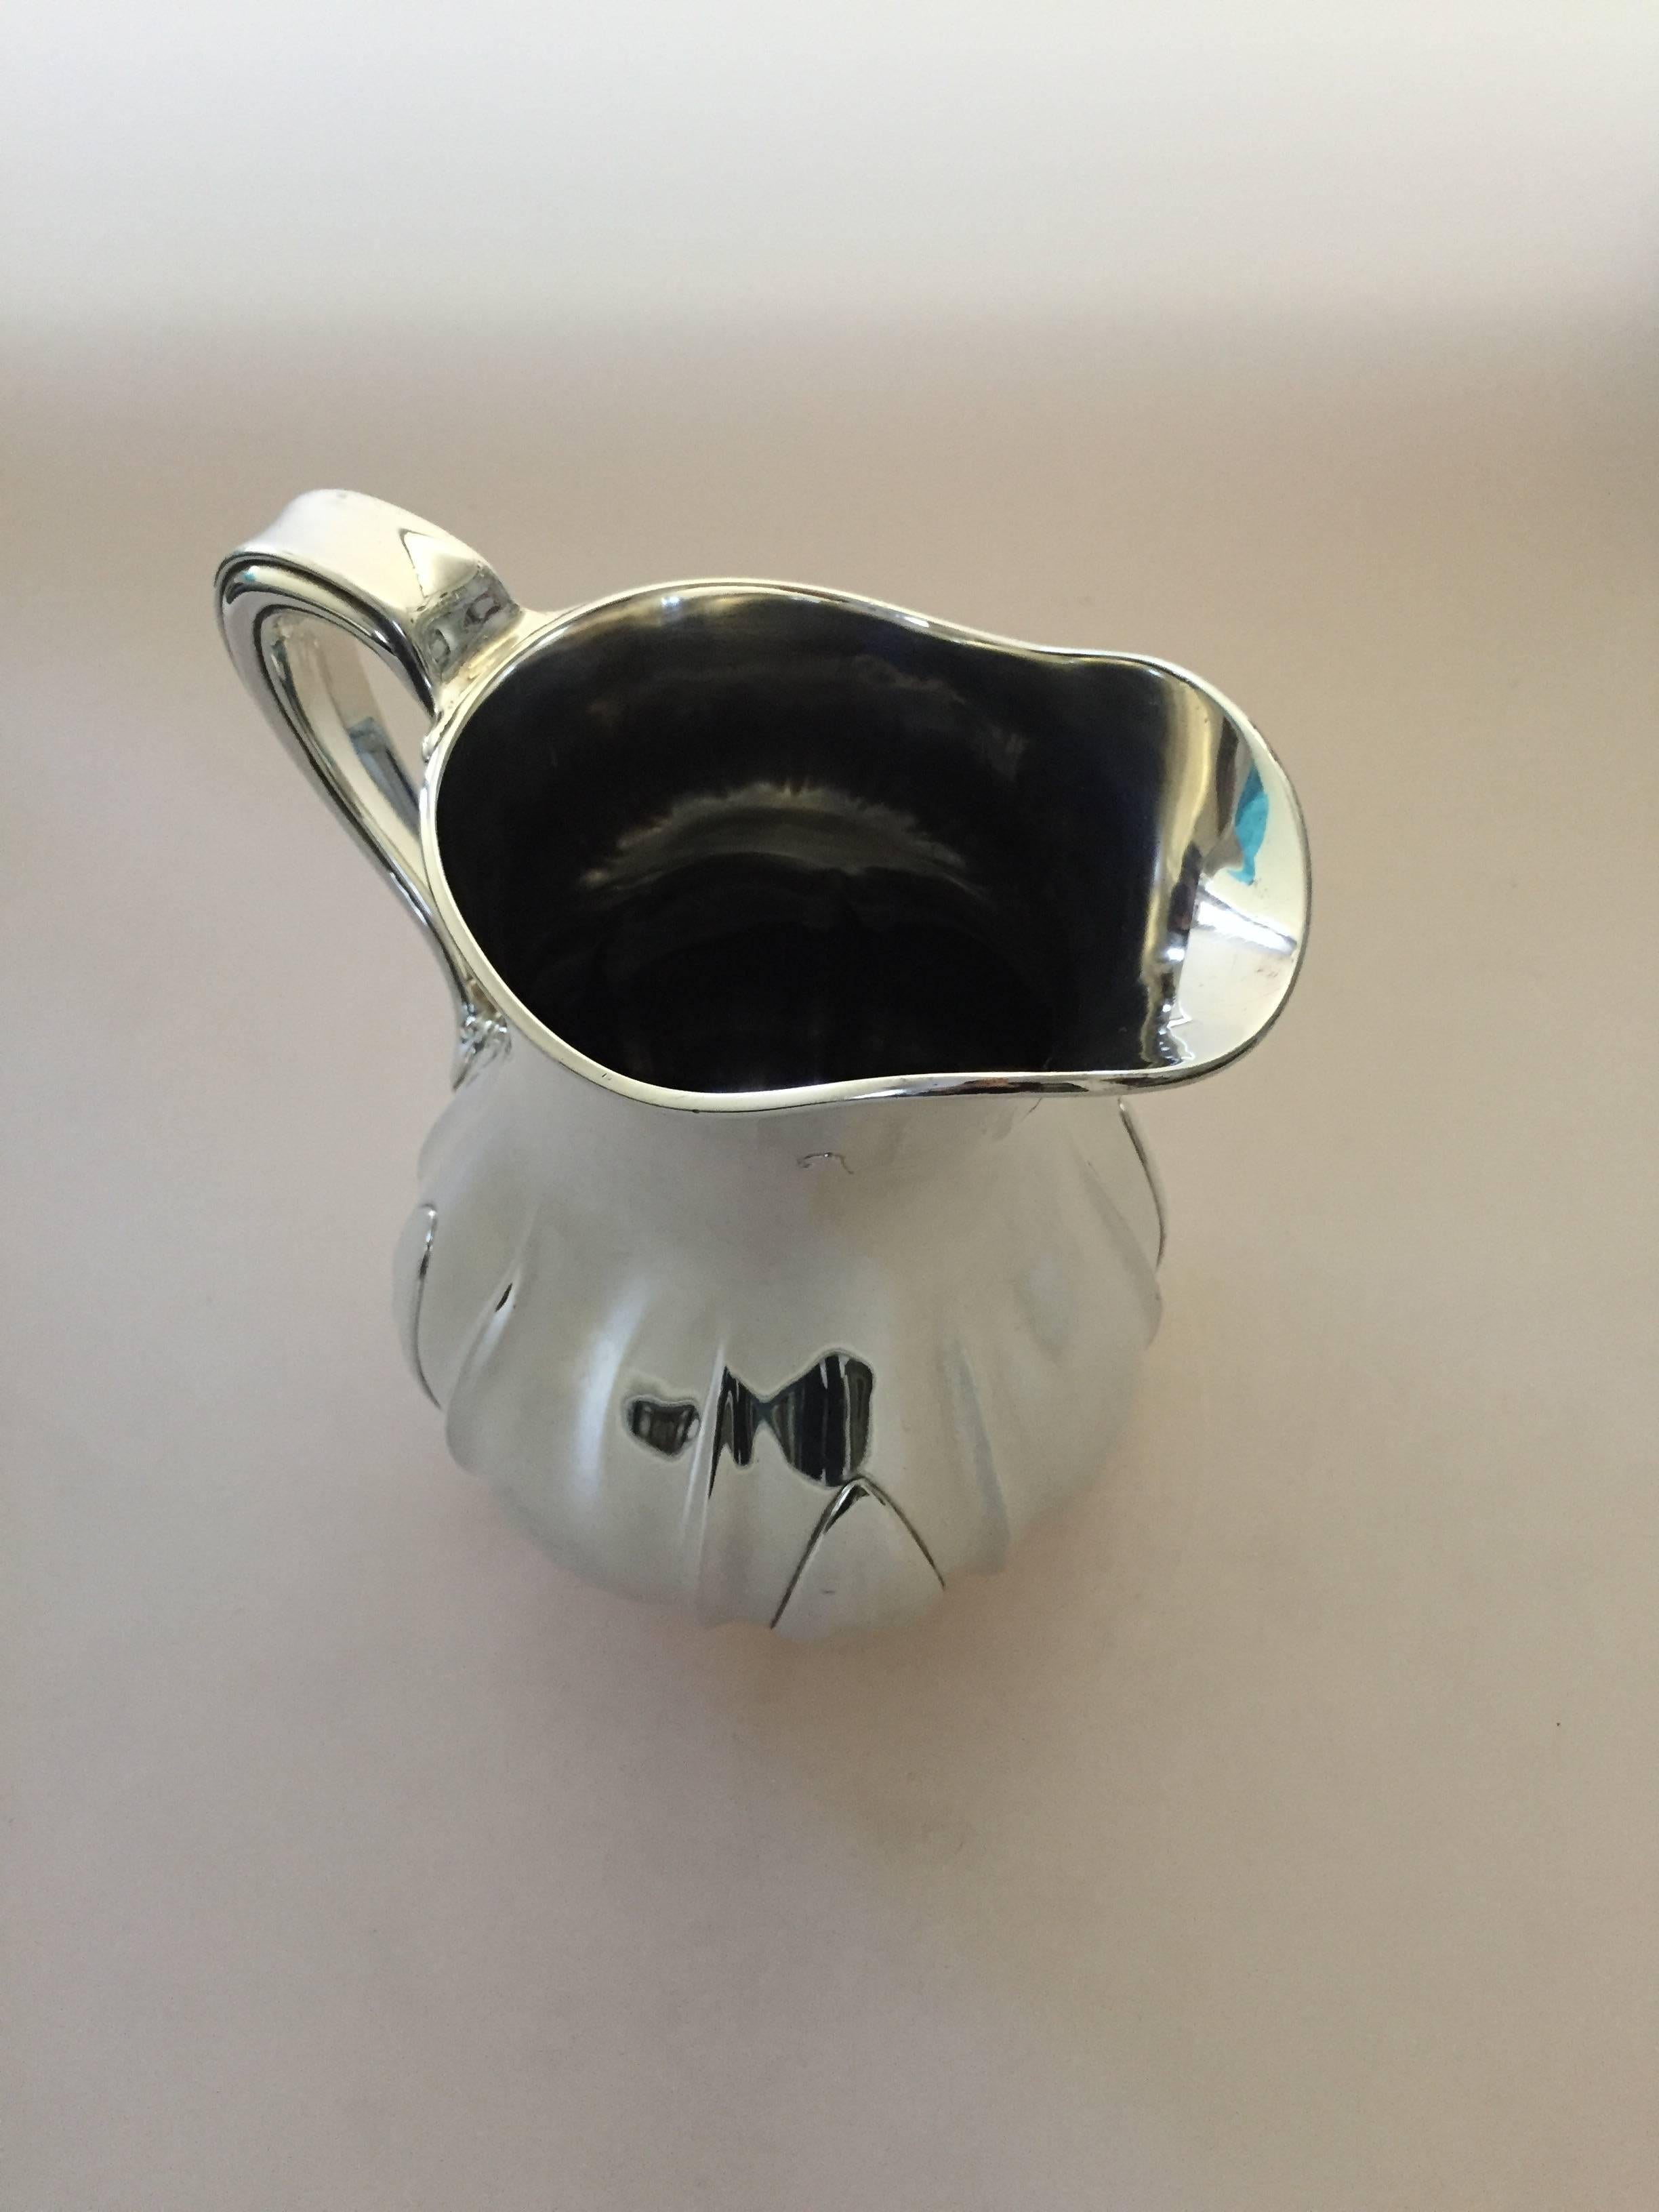 Tiffany sterling silver John Moore 1907-1938 water pitcher #11349D. 

Measures 22,5 cm H.